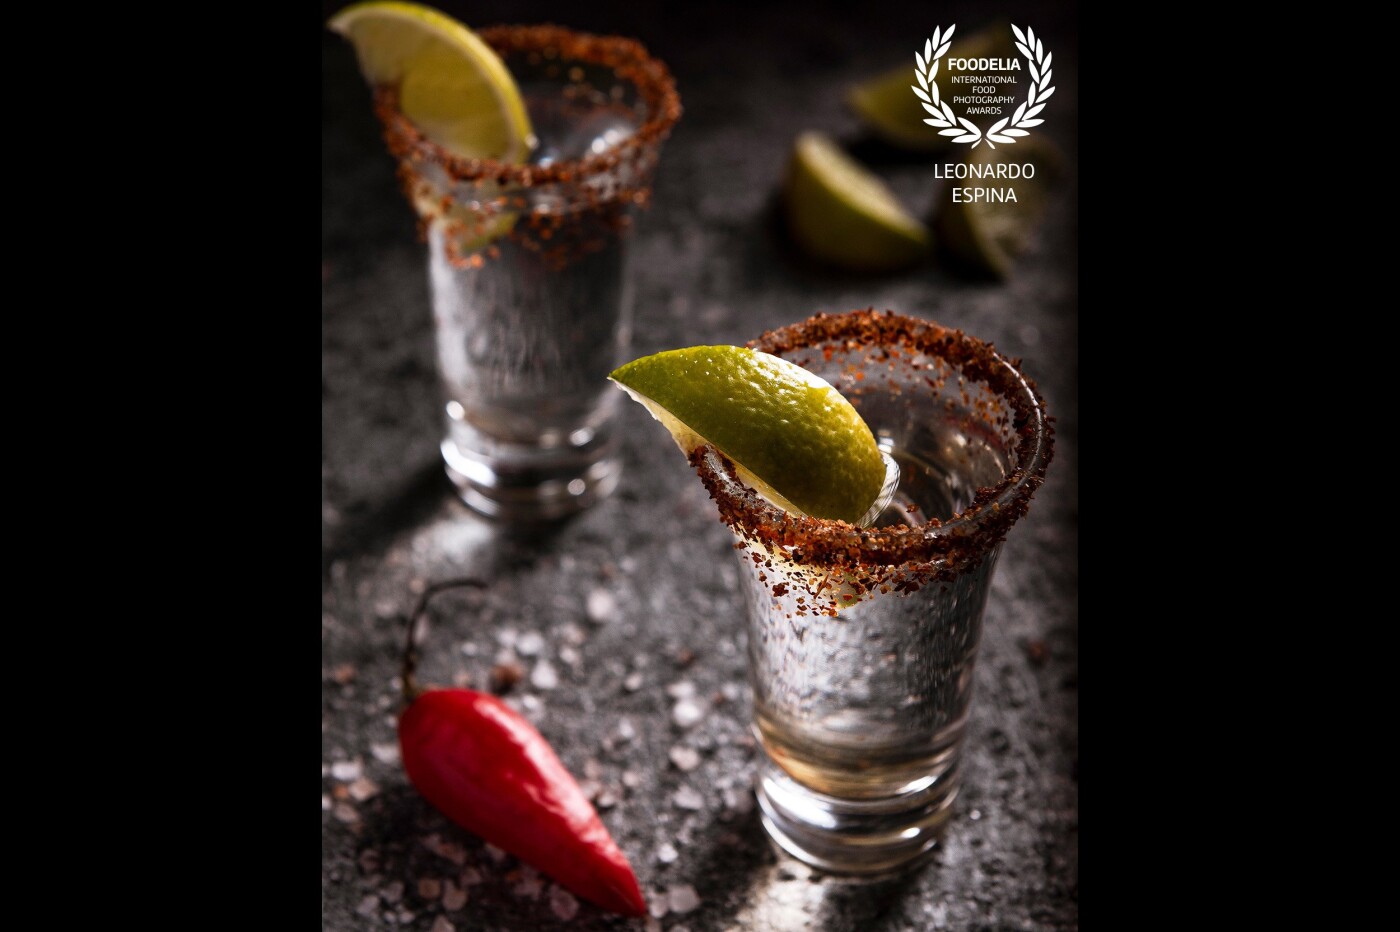 A shot of tequila never goes bad. A very dramatic scene in a dark lighting set up. Giving mystery and drama to the photo…<br />
Enjoy it!!!